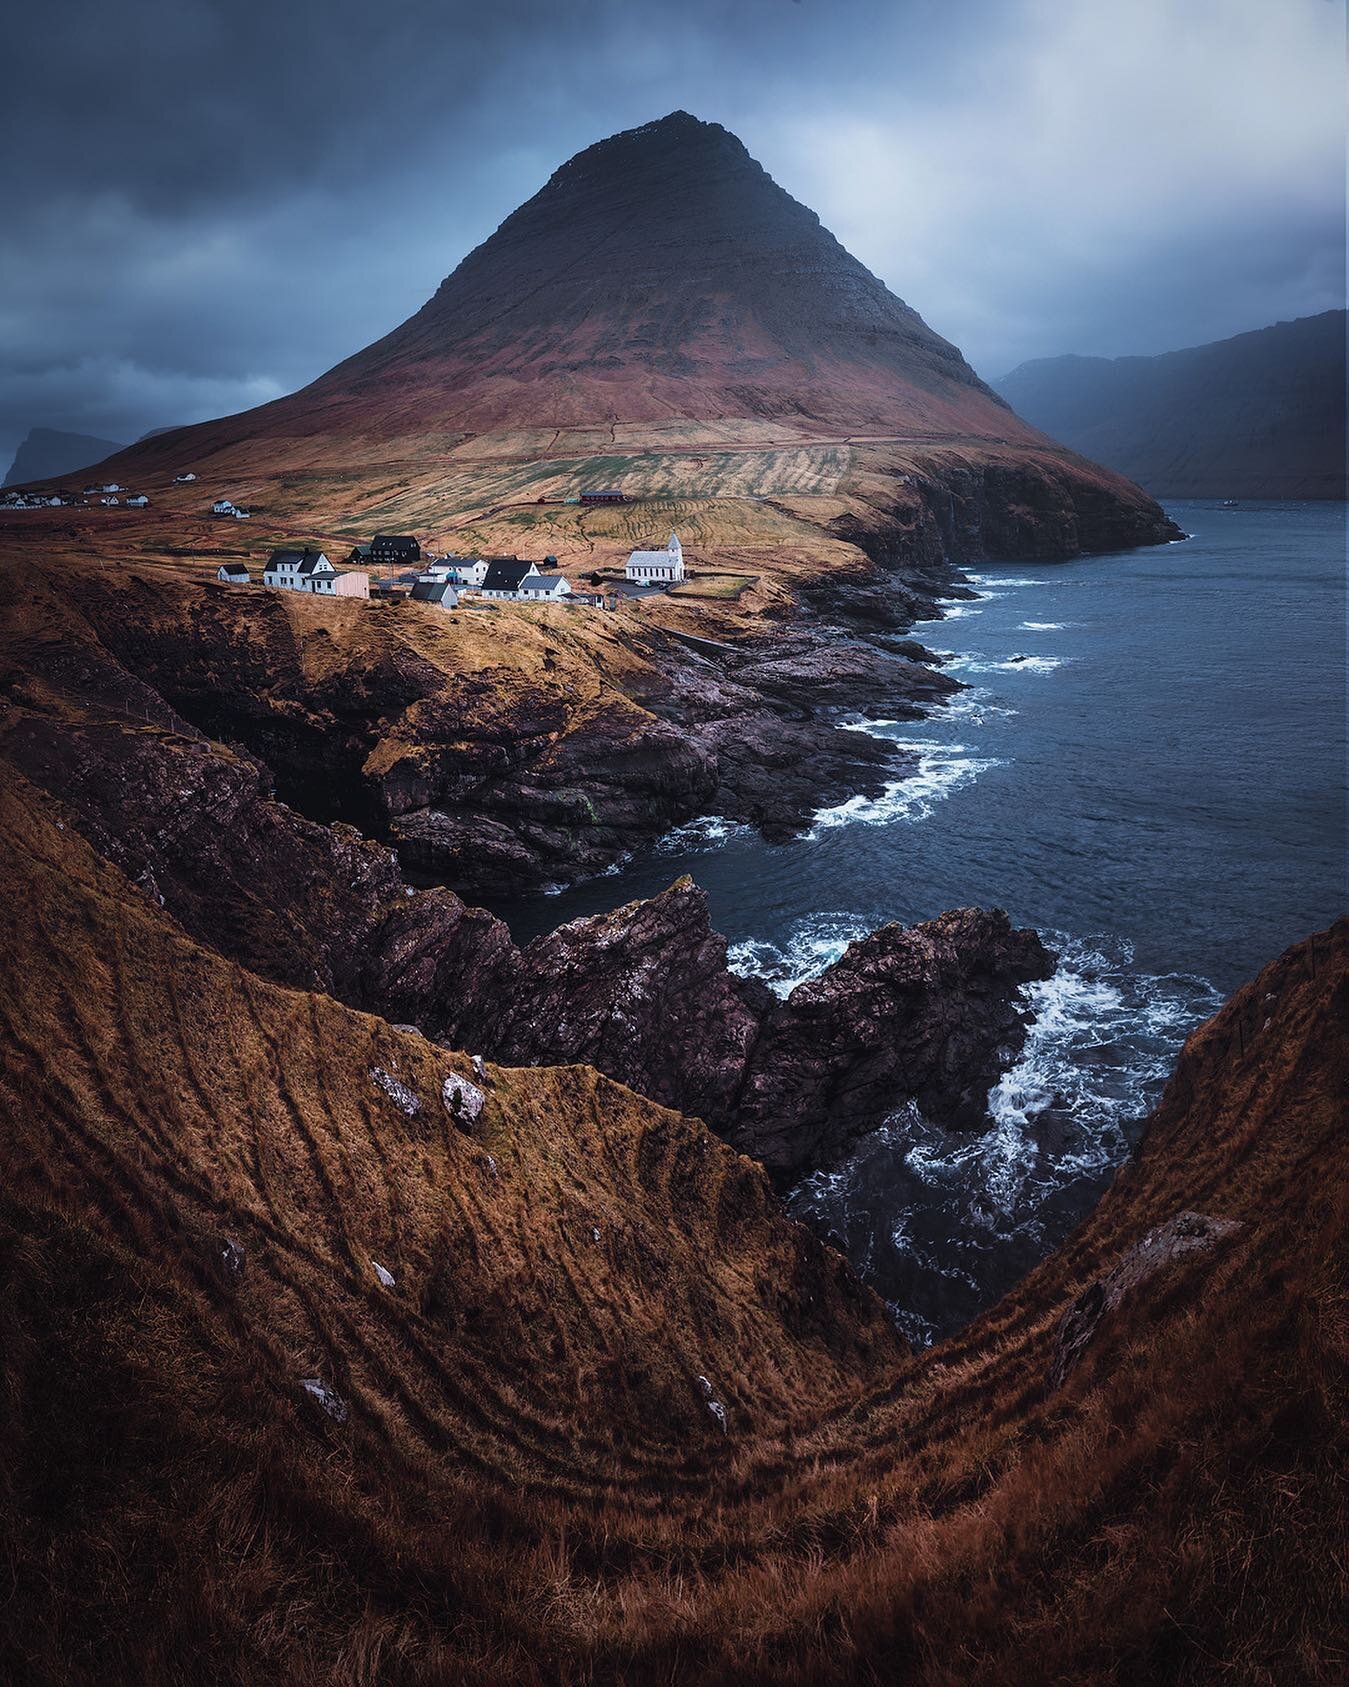 I don&rsquo;t remember where exactly in the Faroe Islands this was. All I remember is that I crashed my drone, broke my camera and cried that day!

Can you believe it&rsquo;s almost September? 🍂 Literally feels like it was March just 16 years ago.
&